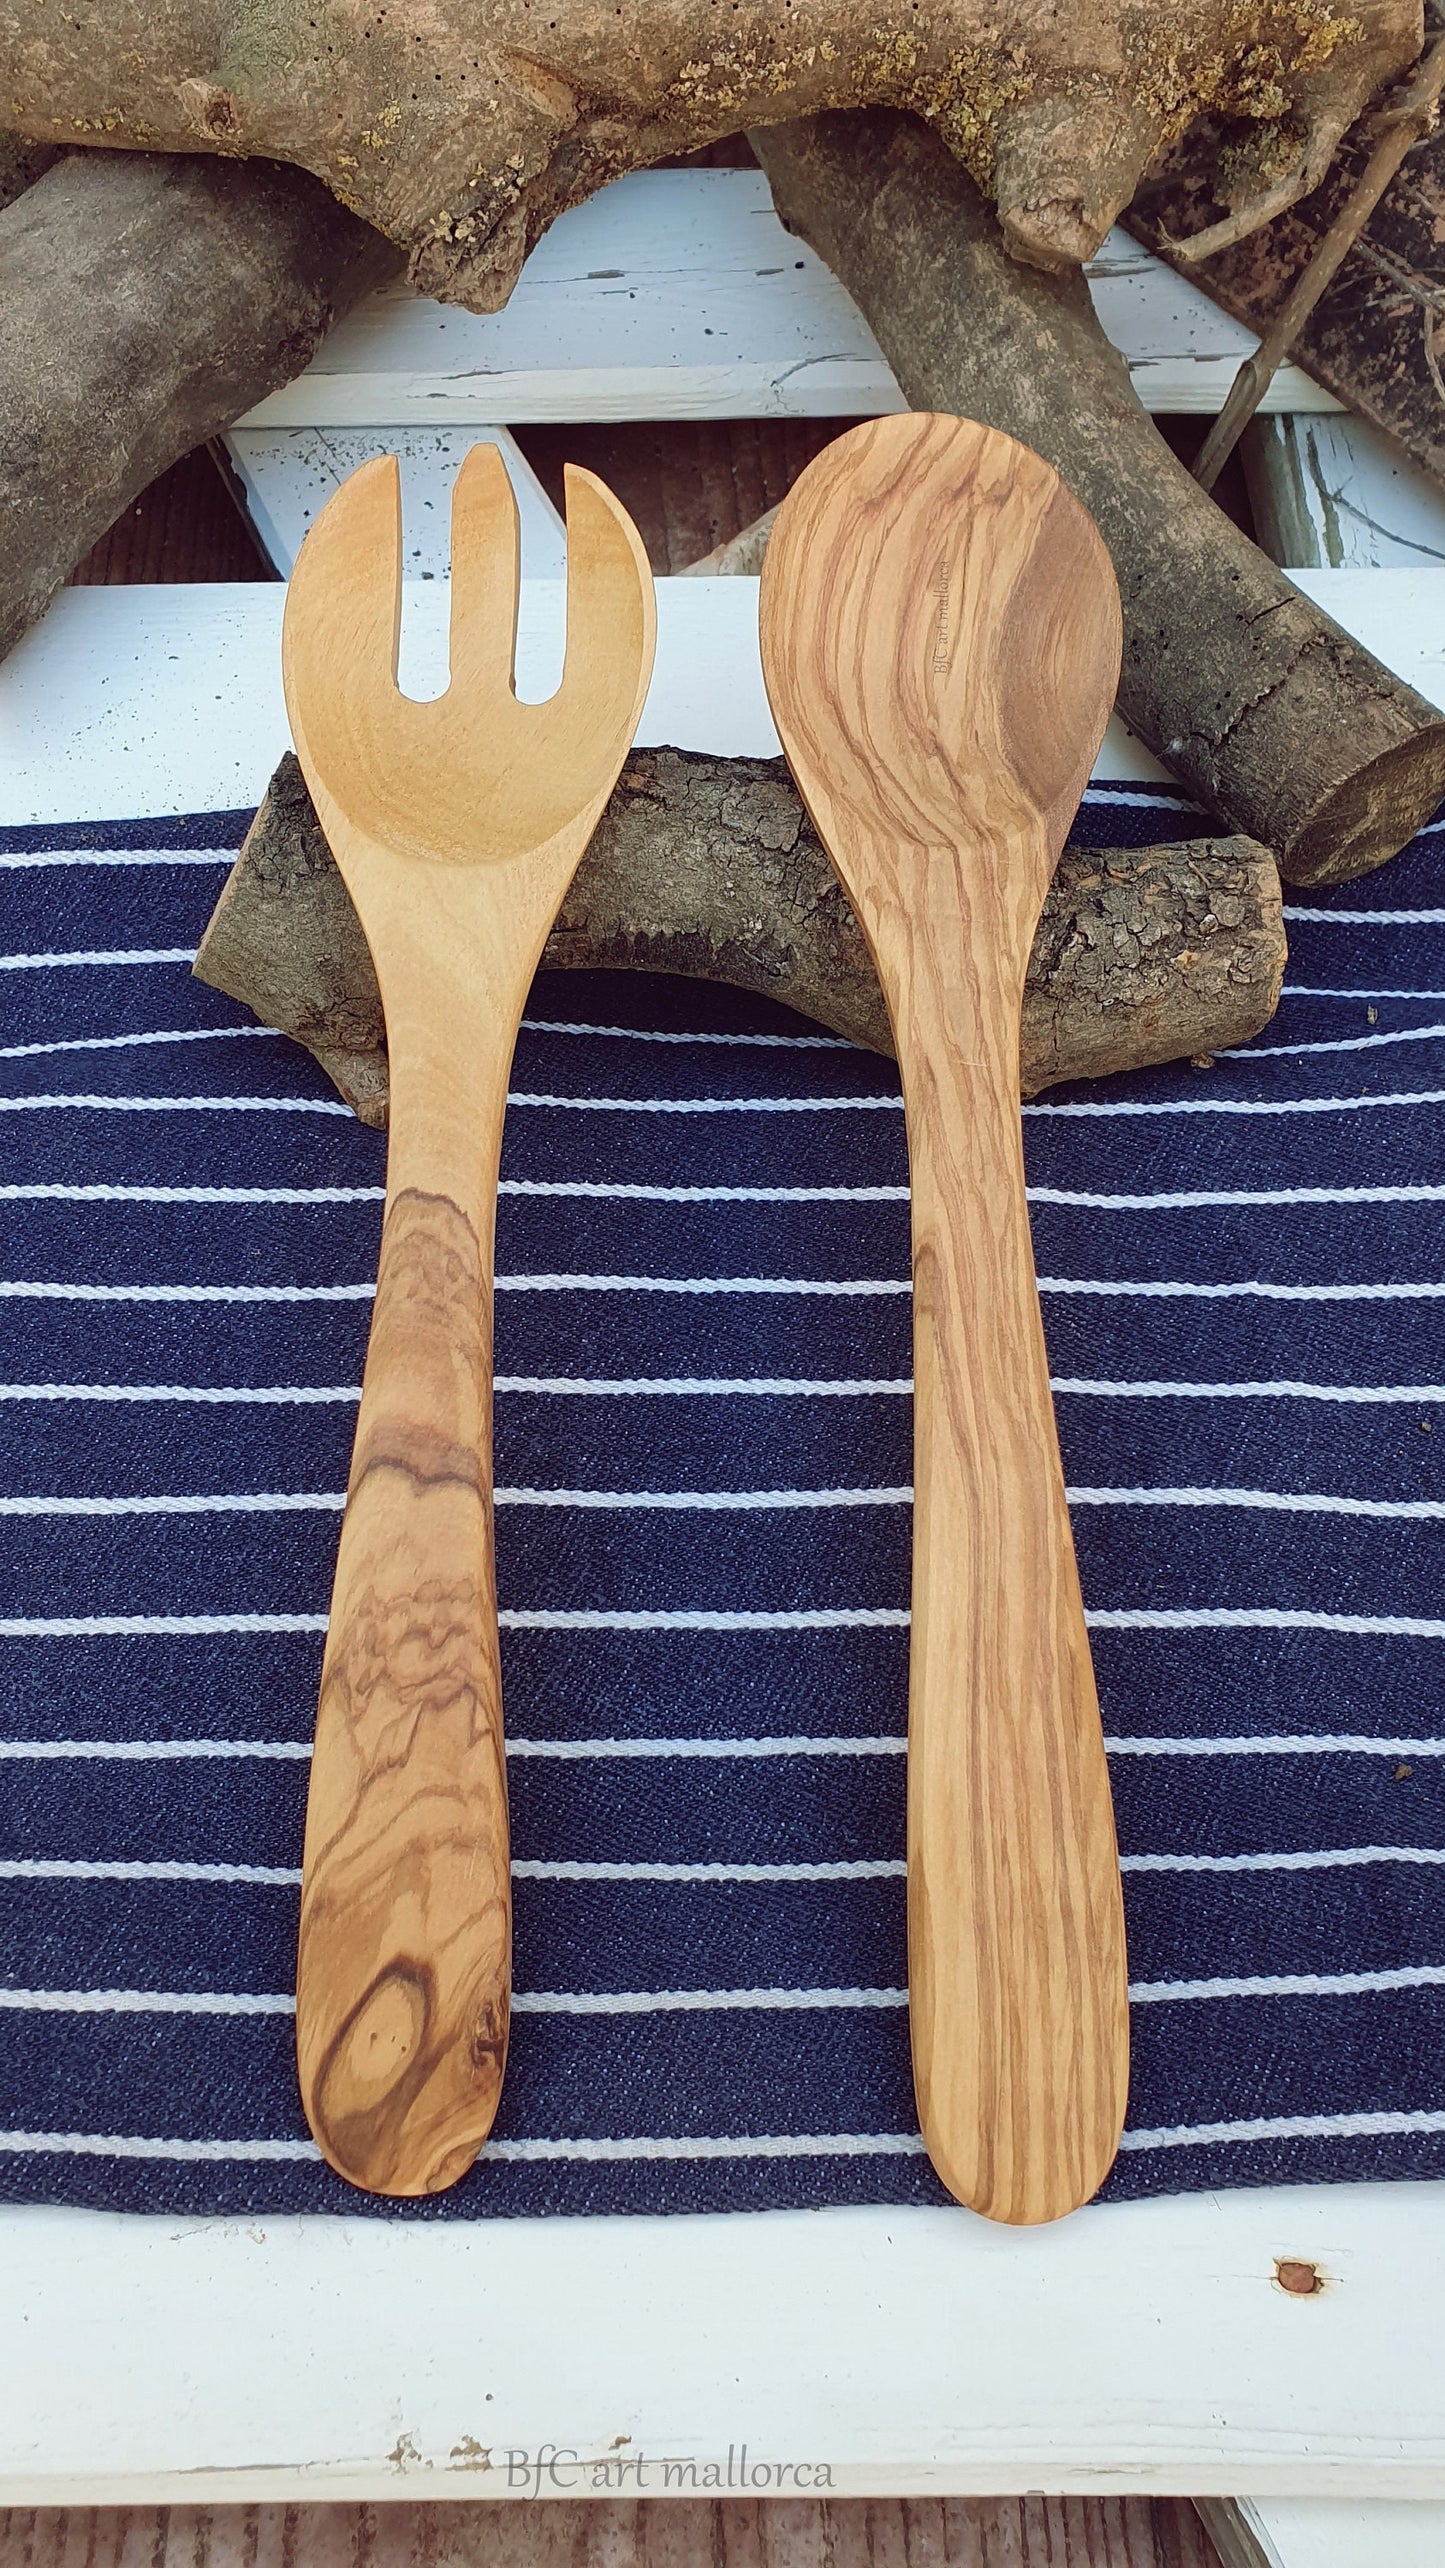 Wooden Spoon and Fork, Salad Spoon, Ecological Cutlery, Spoon and Fork, Rustic Olive Wood Spoon and Fork, Craft Cutlery, Curved Craft Spoon